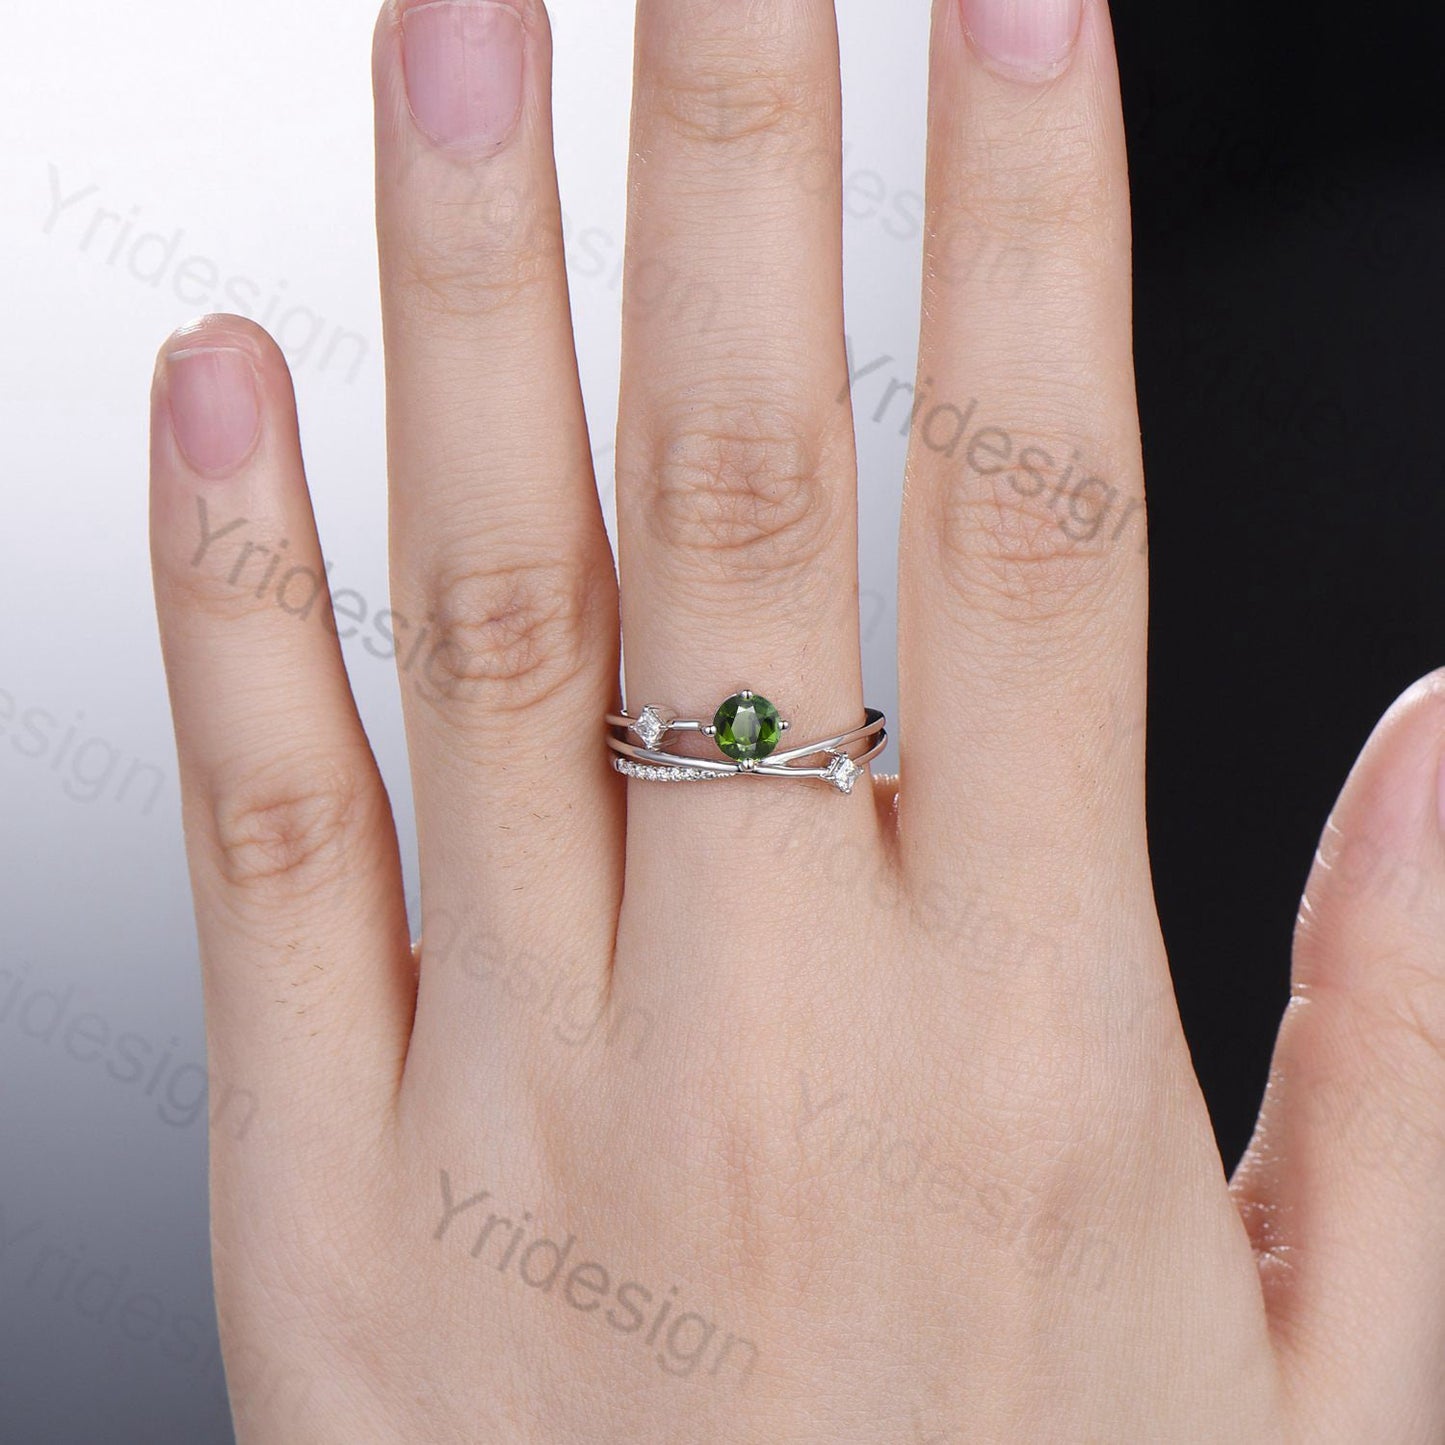 Unique green tourmaline engagement ring Twisted infinity moissanite wedding ring Vintage split shank bridal ring proposal gift for women - PENFINE